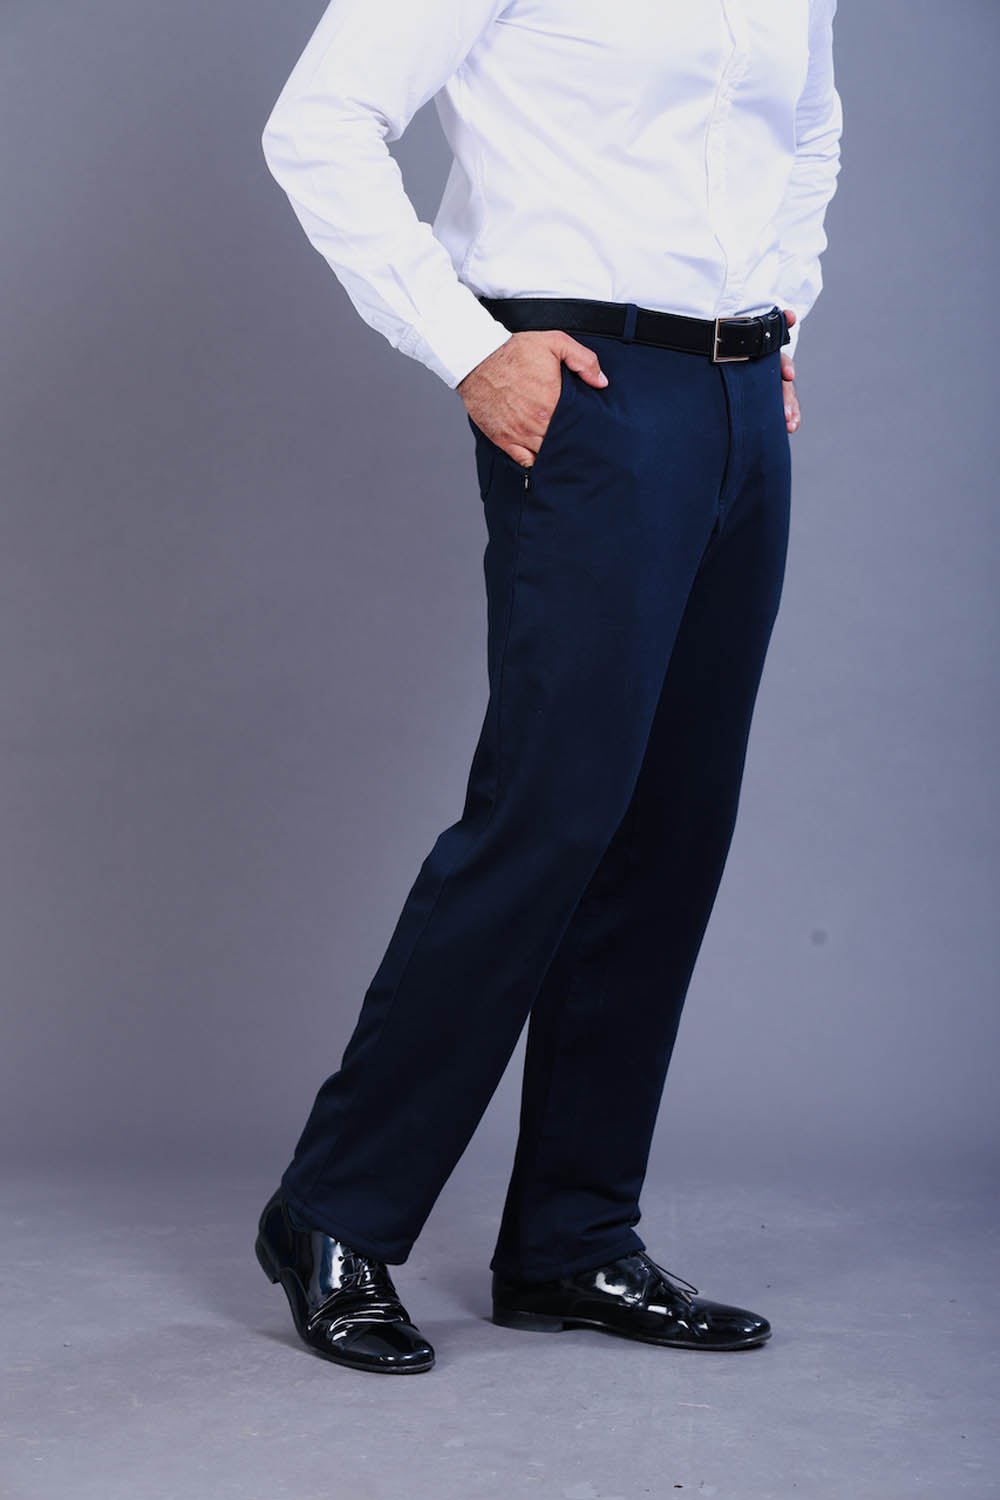 Gents Navy Formal Look Stretch - 008